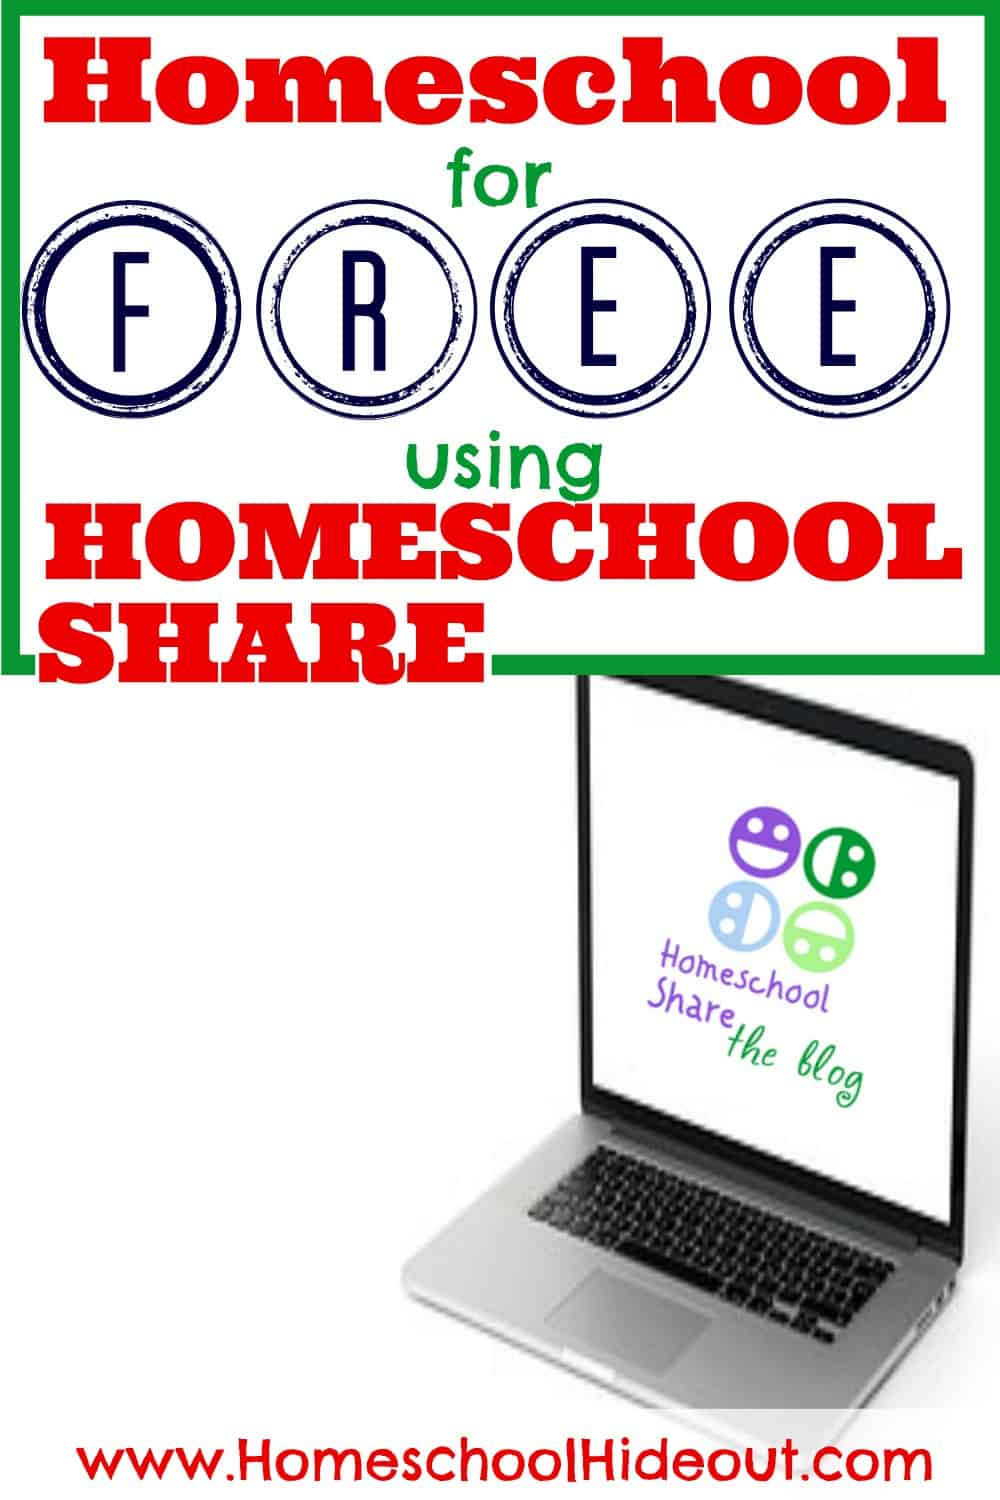 I had never heard of this site! Add it to my list that allows you to homeschool for free using Homeschool Share.